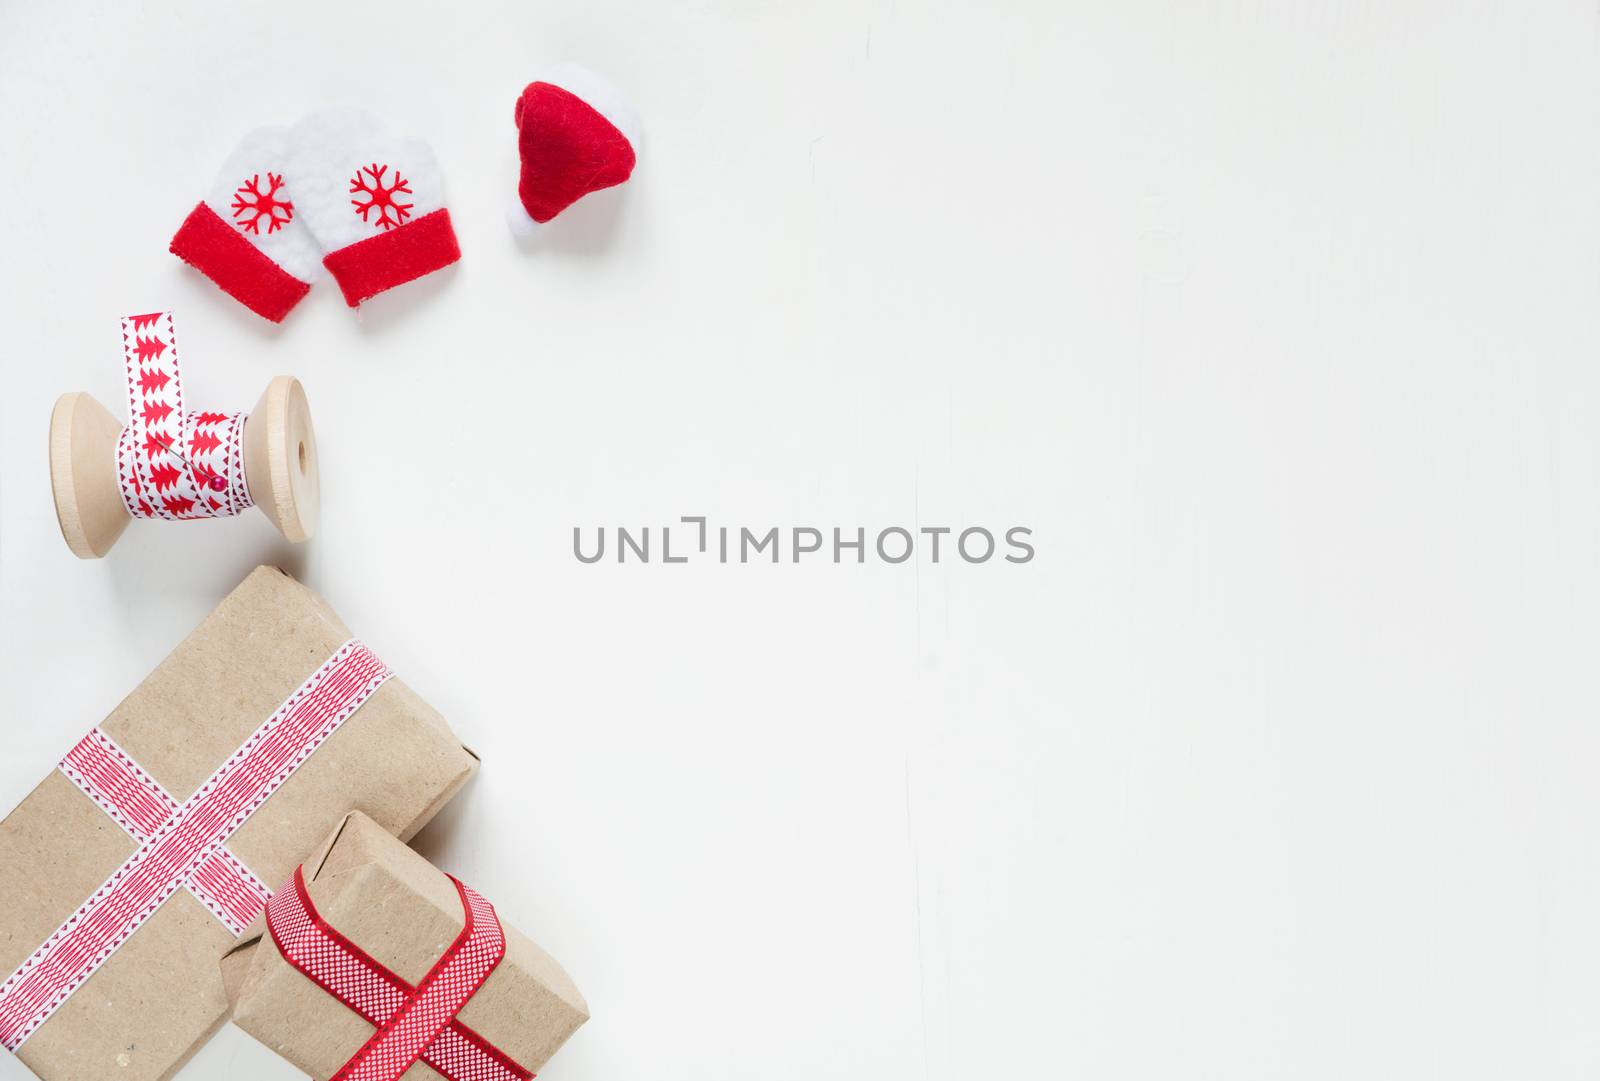 Red Christmas frame, consisting of gift boxes tied with ribbons, Santa's glove and mittens on a white background with space for text. Flat lay composition for greeting cards, websites, social media, magazines, bloggers, artists etc. Christmas wallpaper